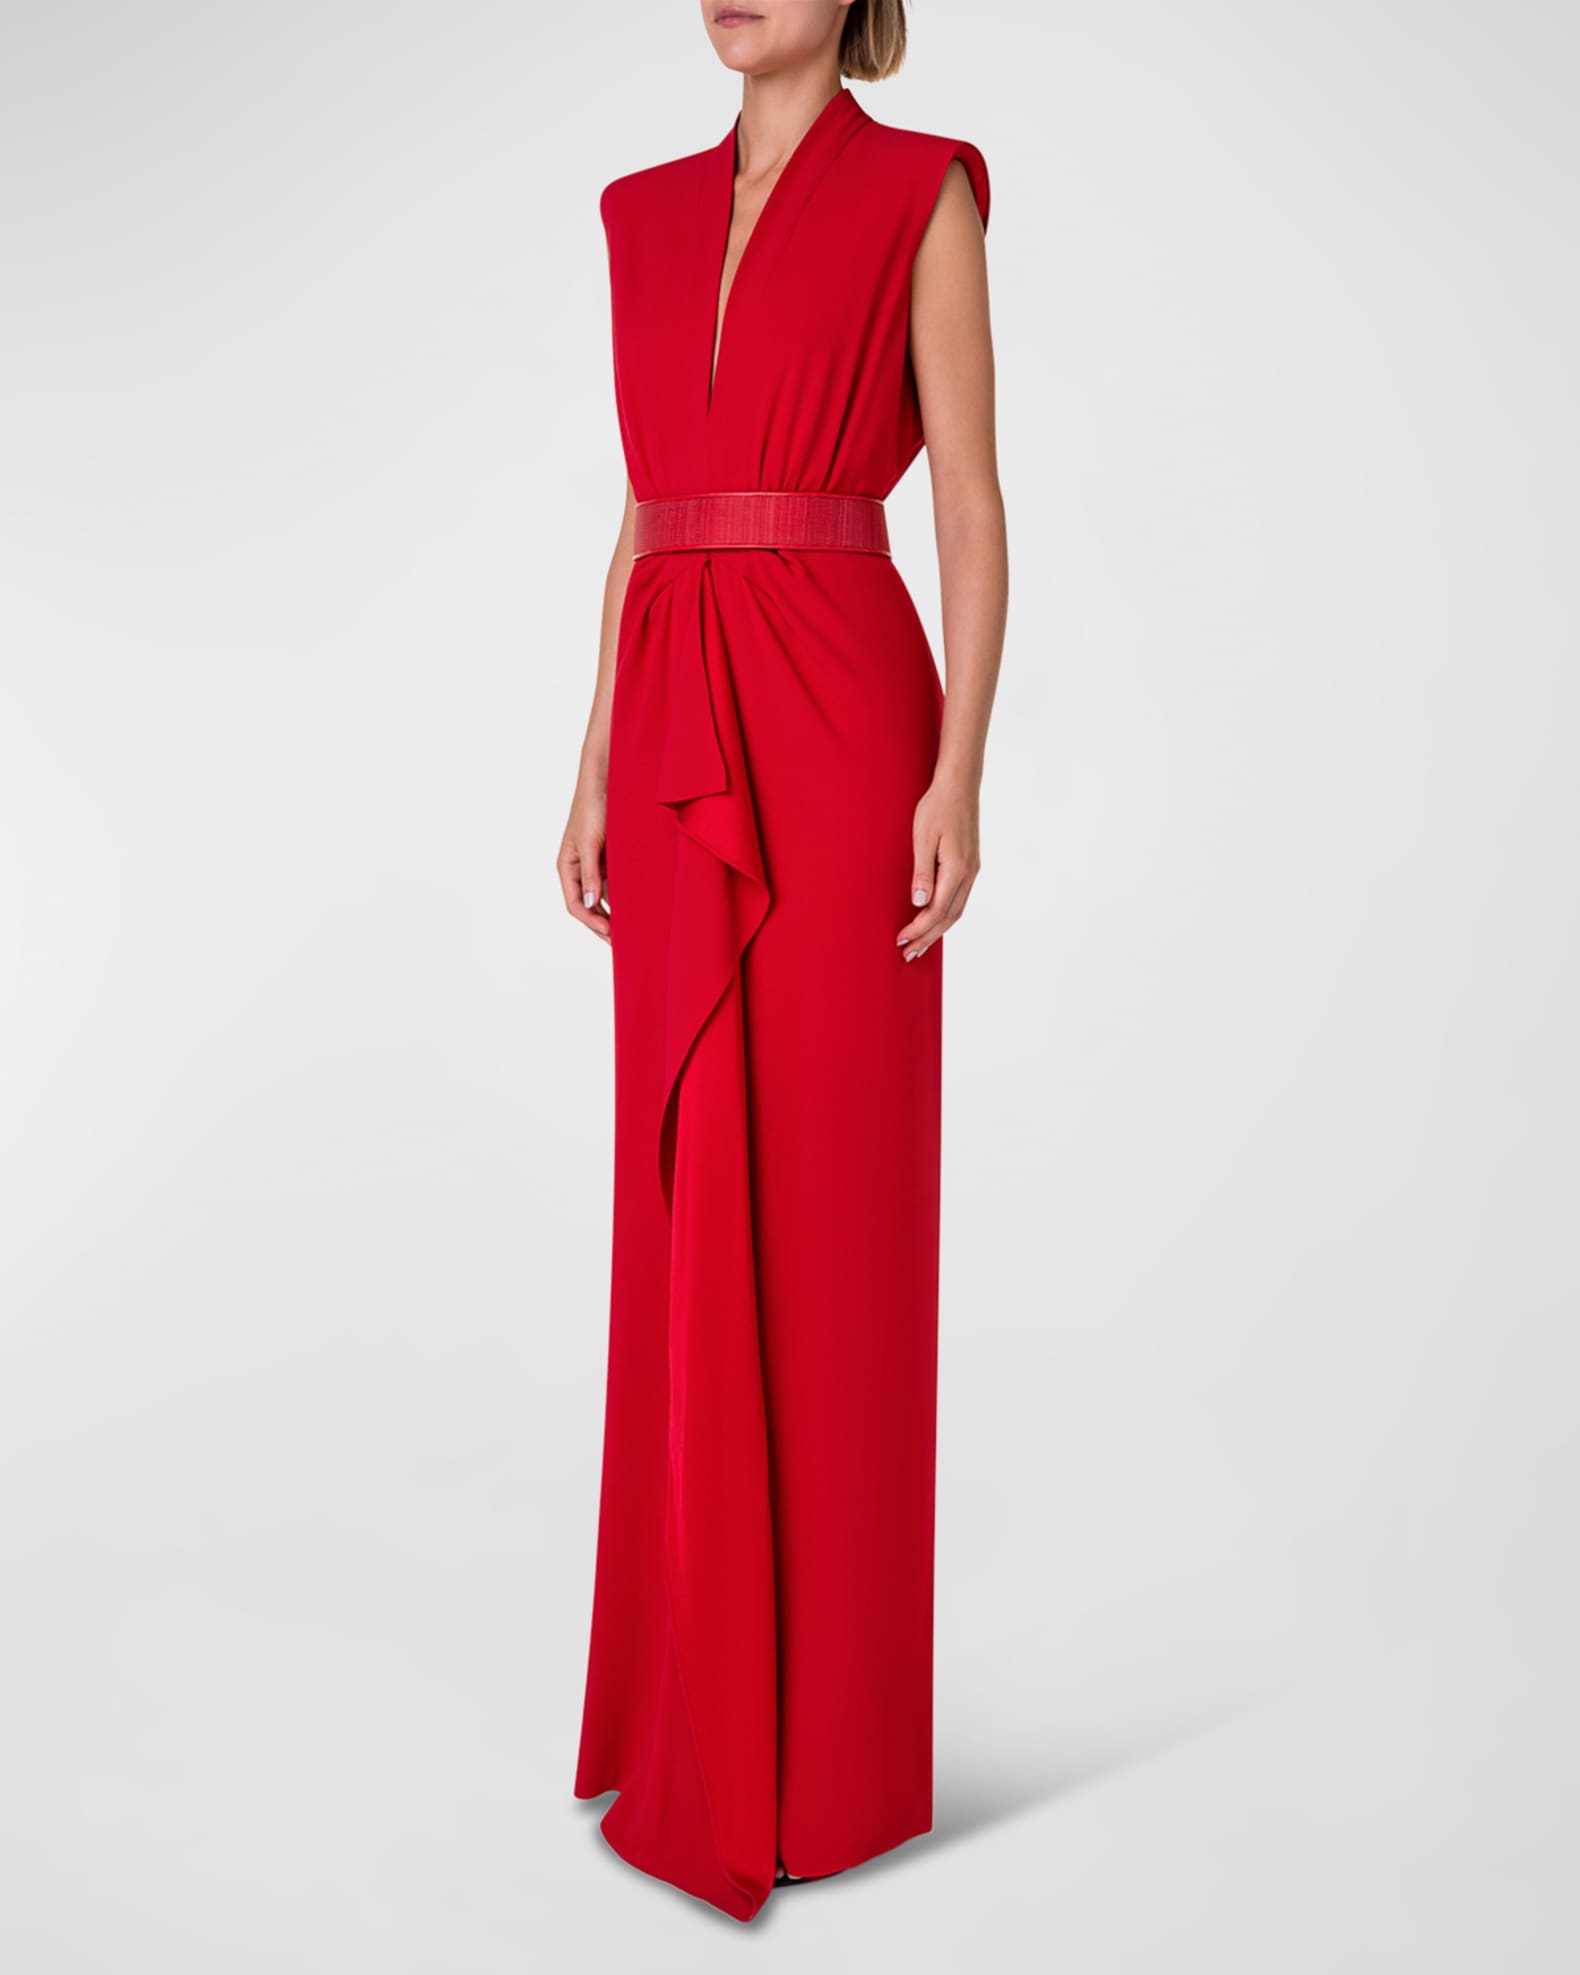 Akris Belted Crepe Gown with Ruffle Front Detail | Neiman Marcus